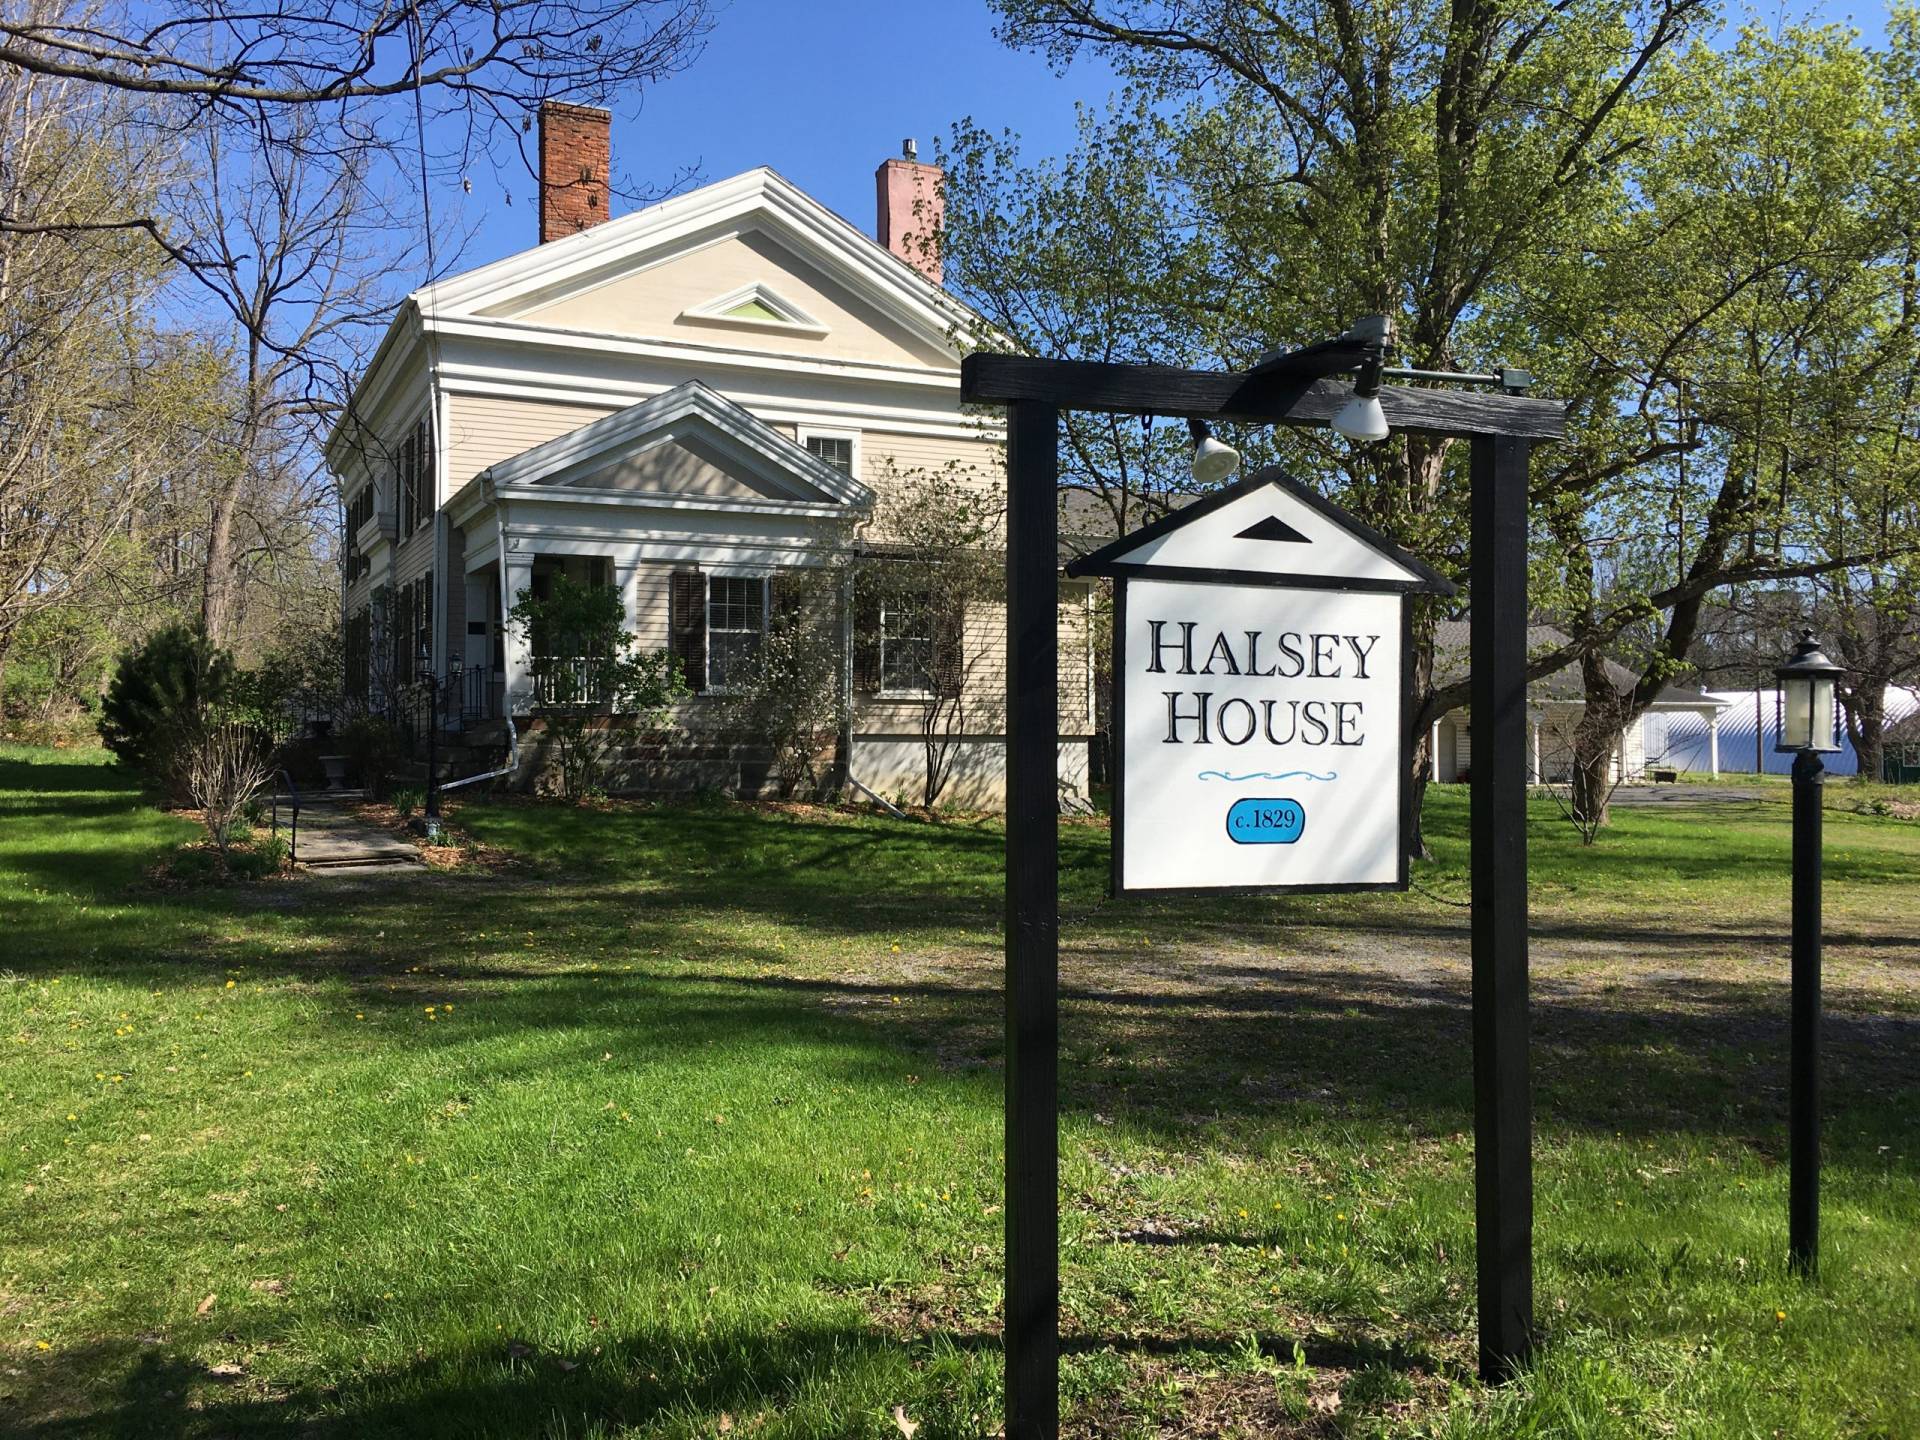 Halsey House front sign